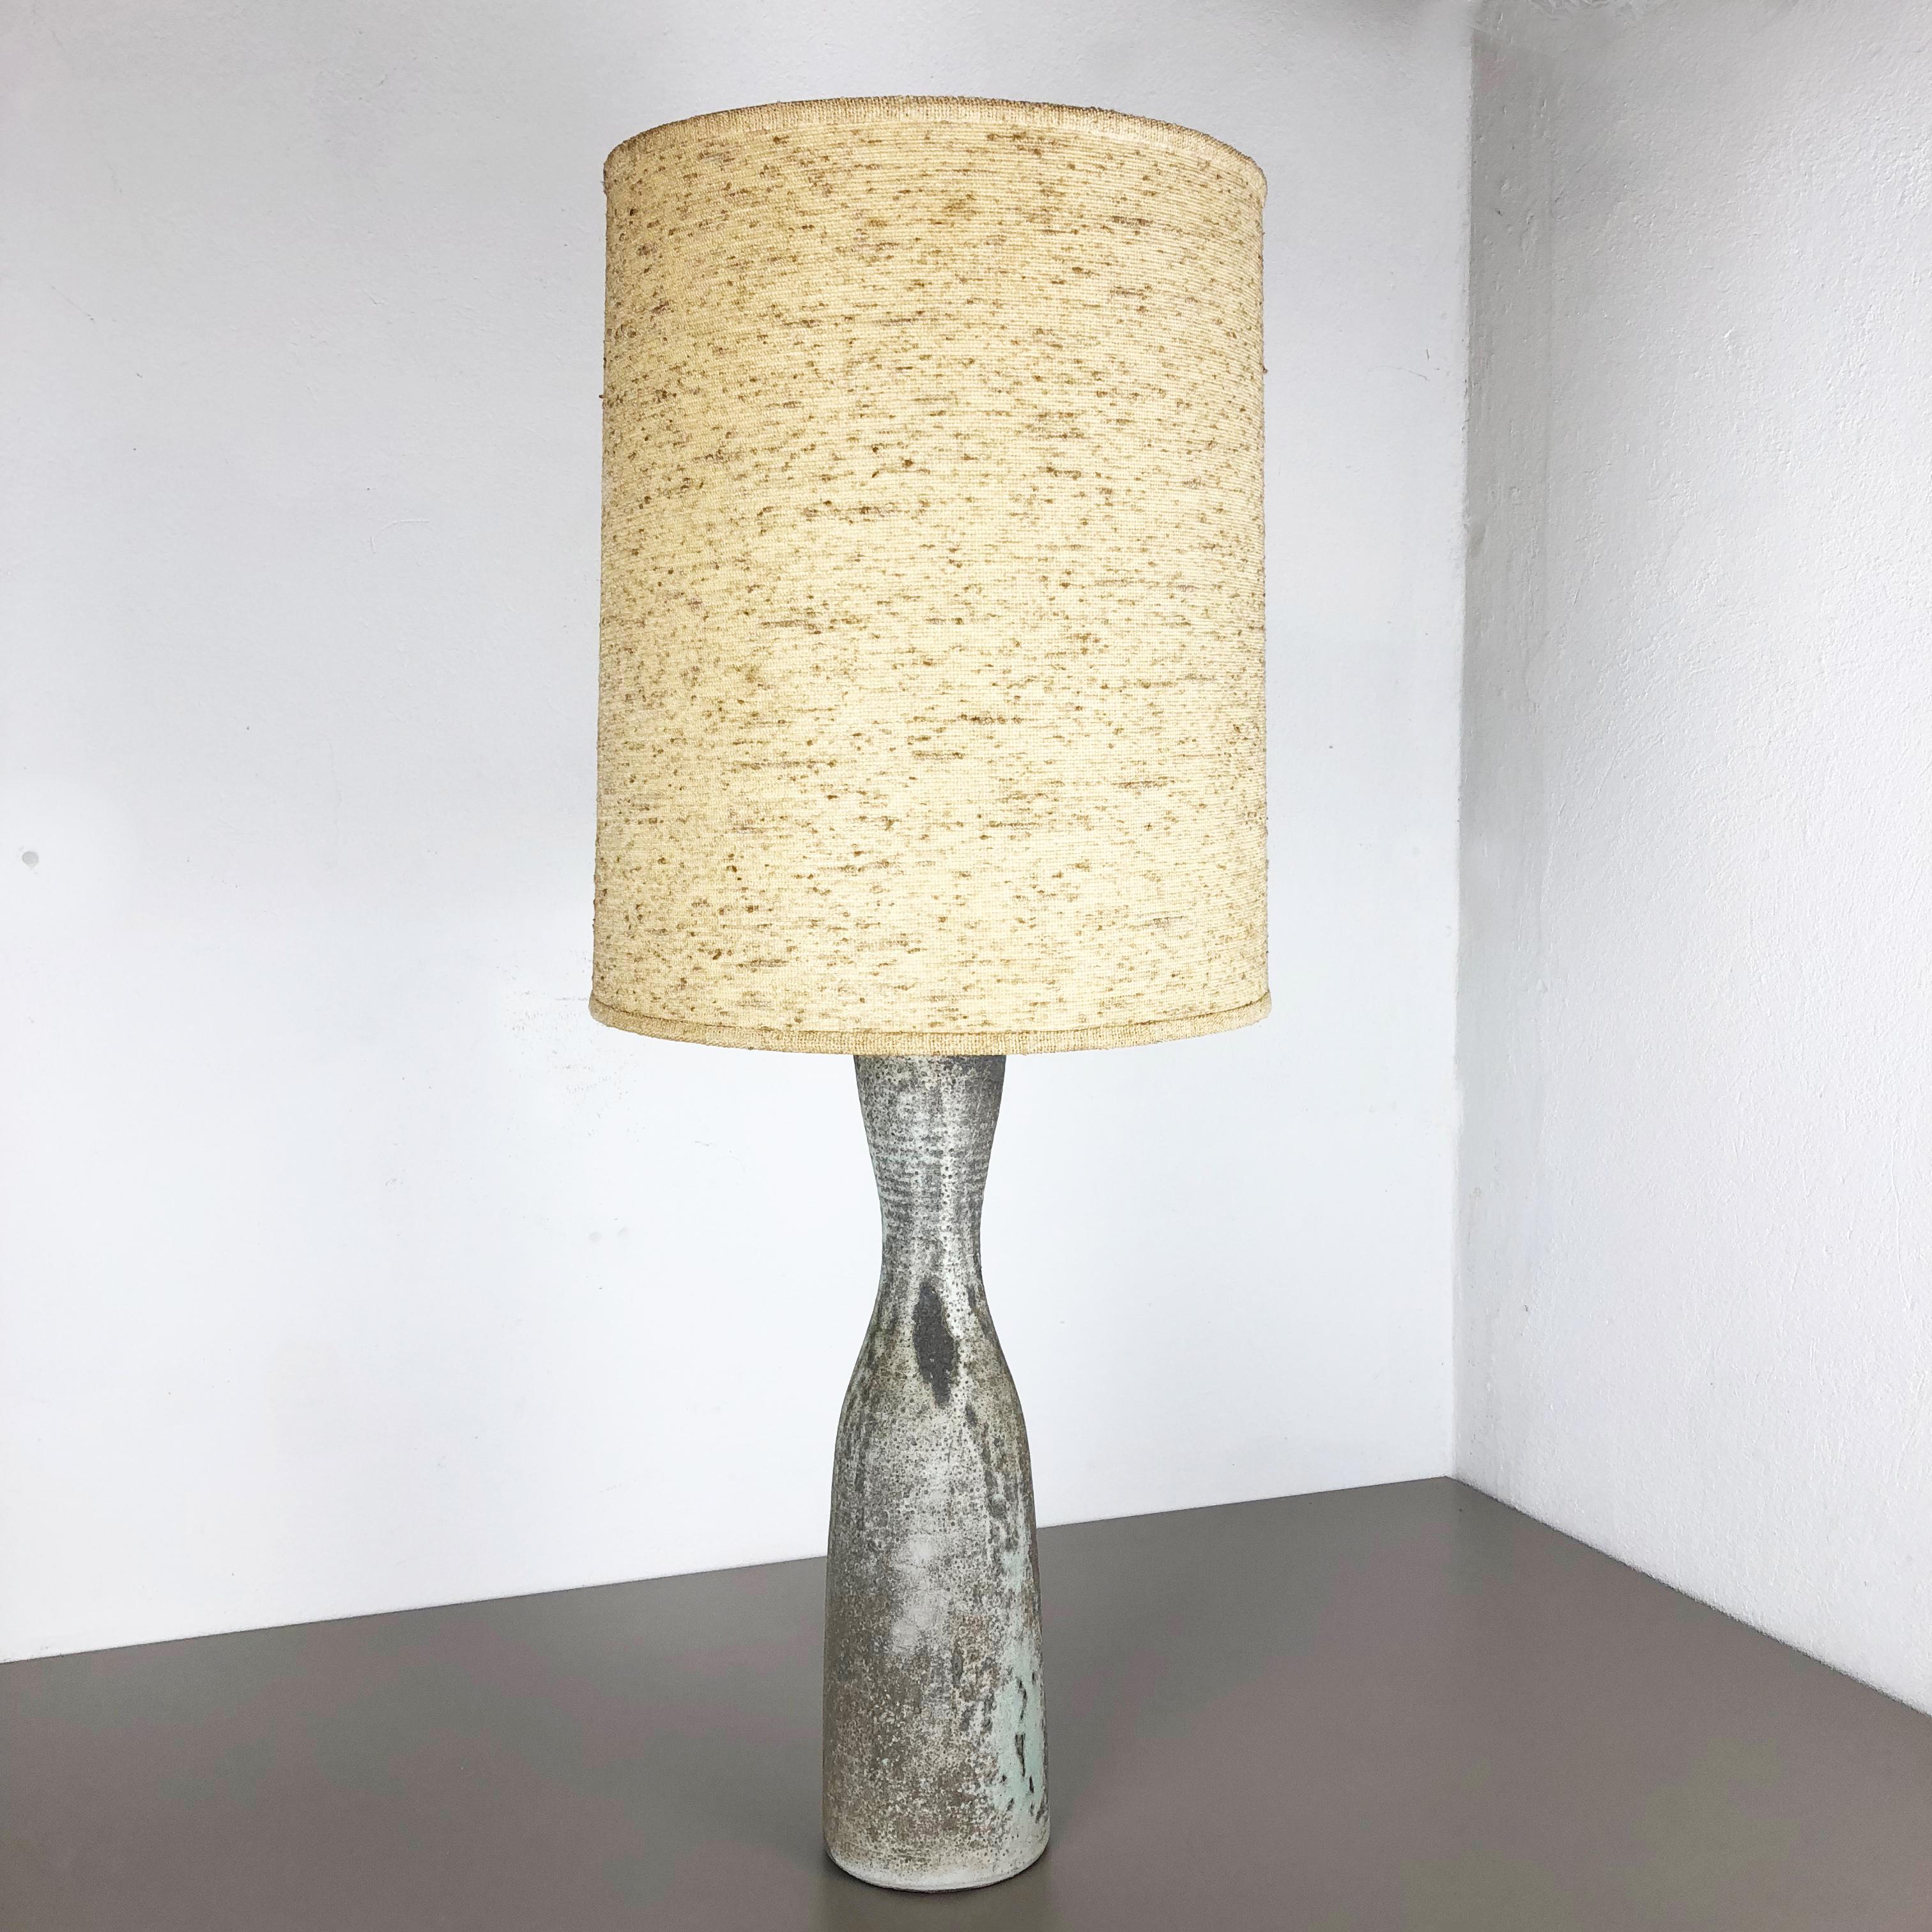 Ceramic Studio Pottery Table Light by Piet Knepper for Mobach, Netherlands 1960s For Sale 12